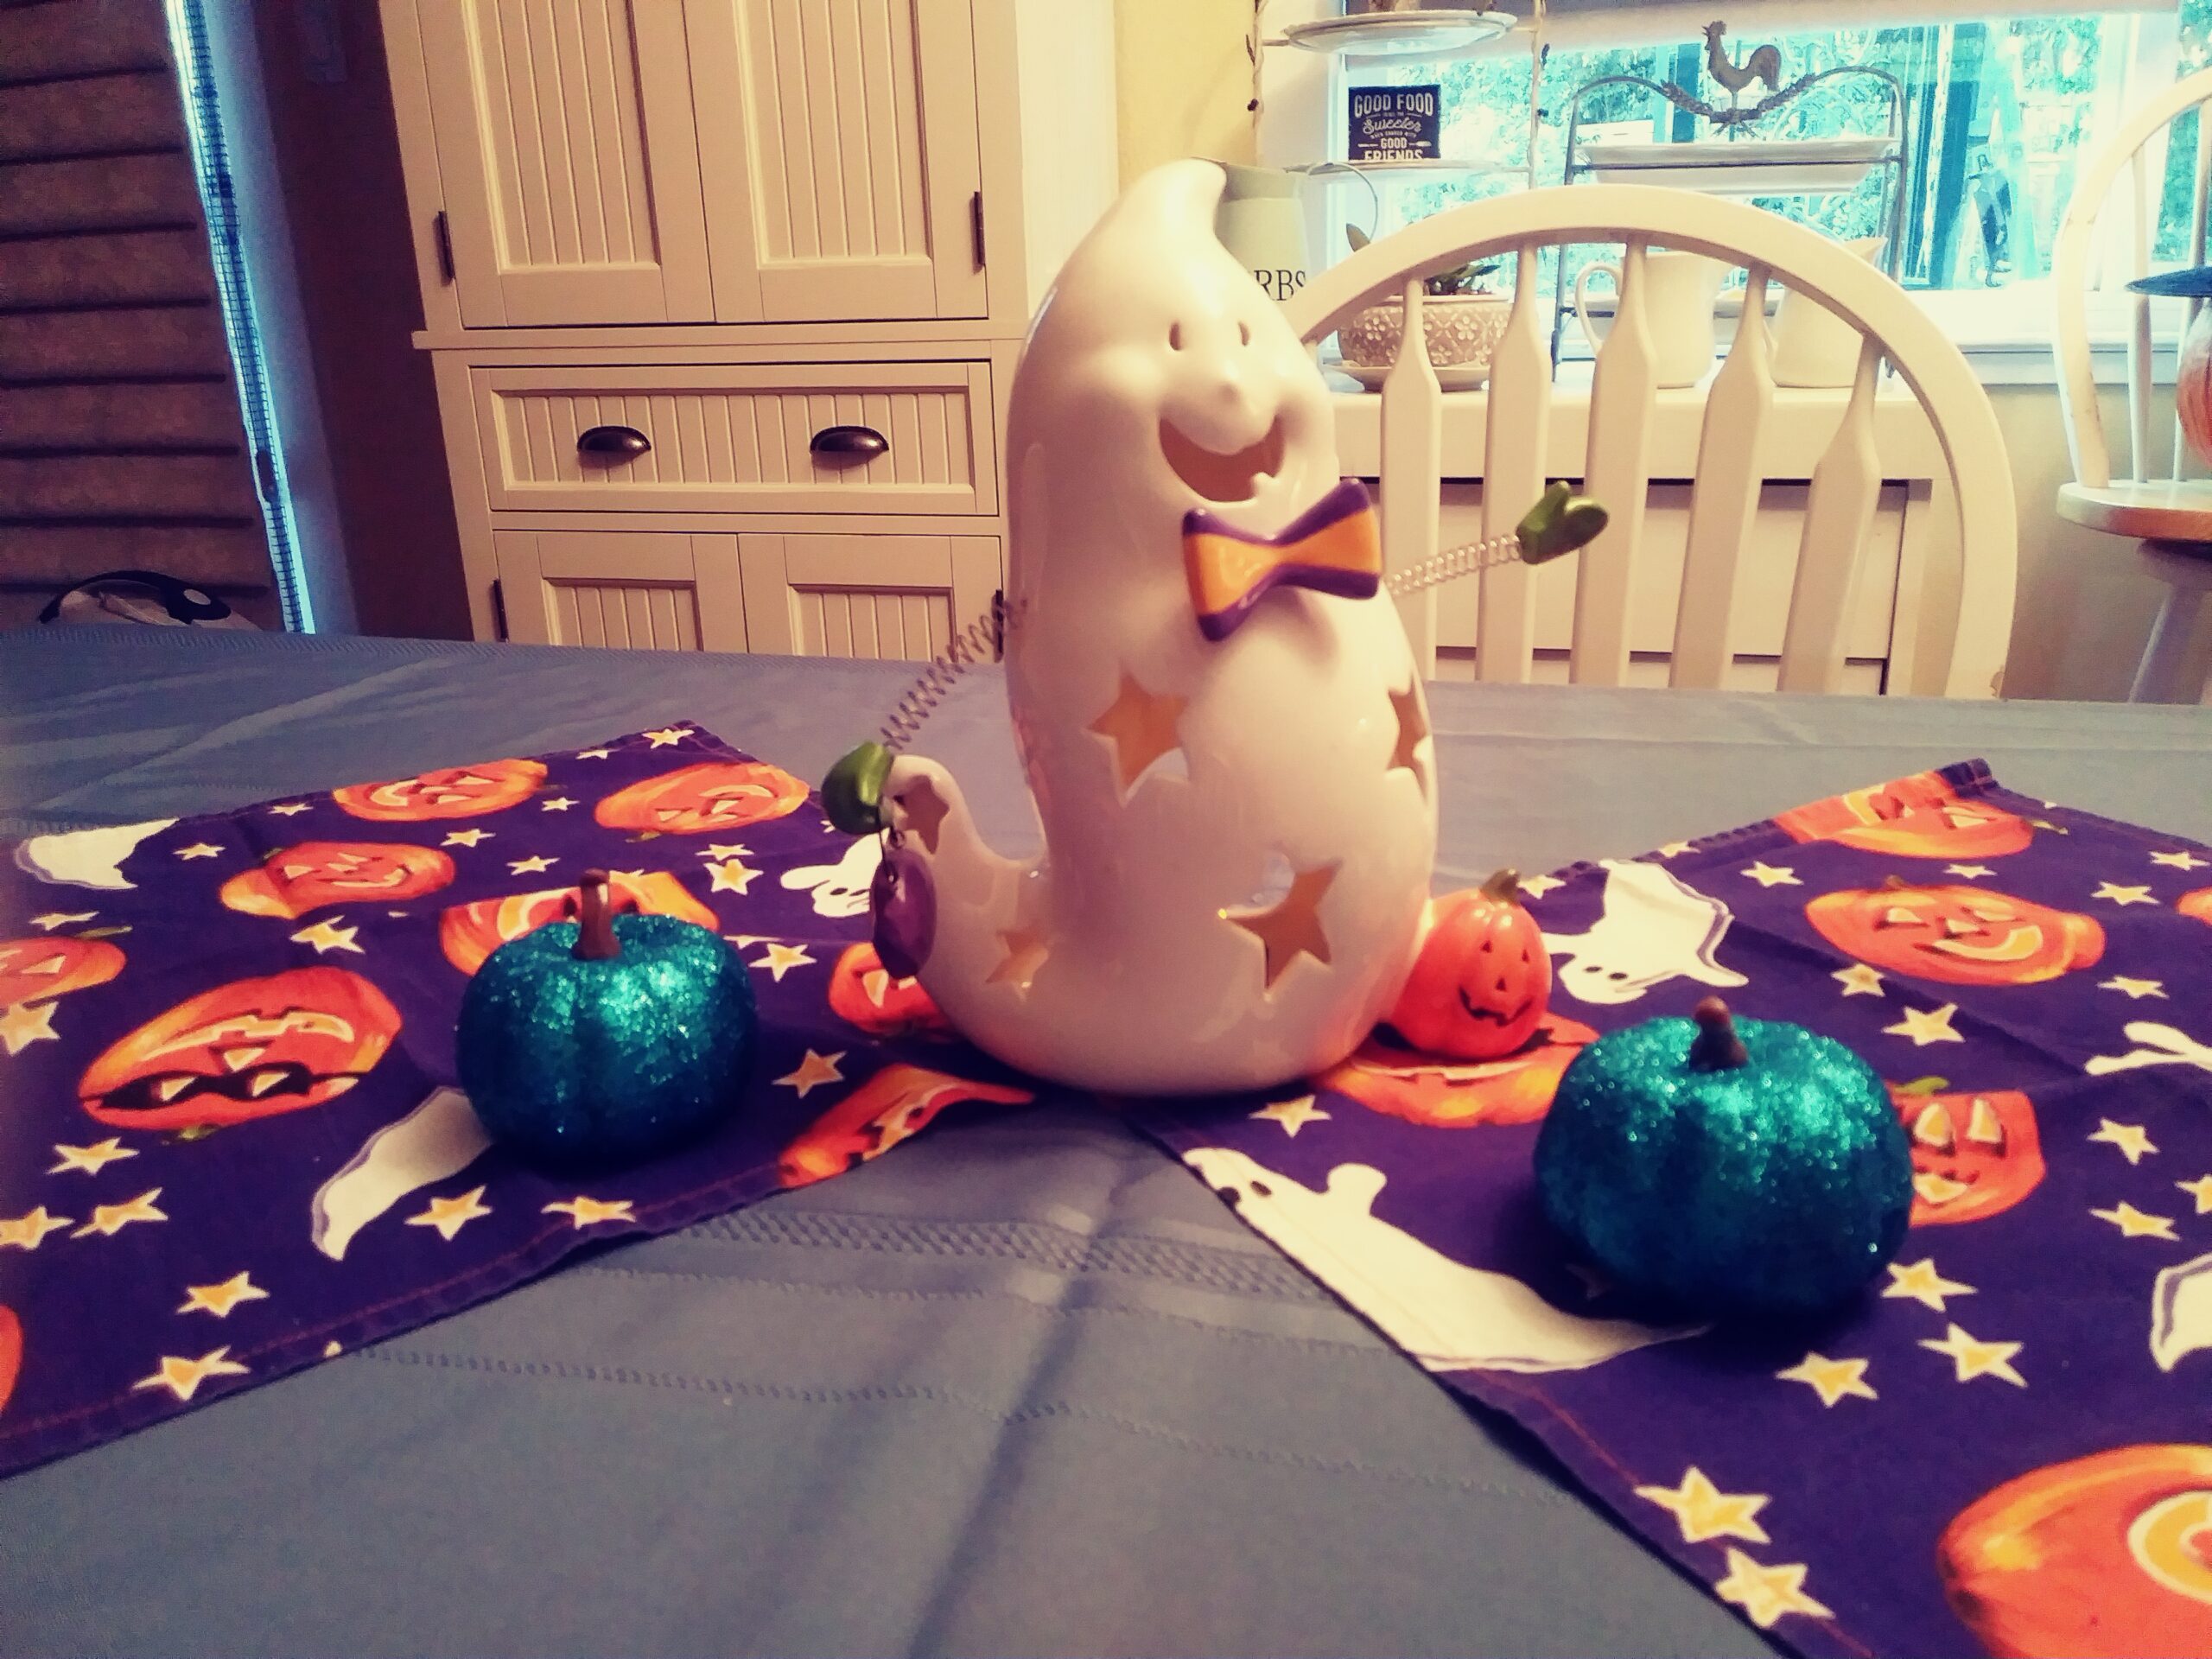 Halloween centerpiece with ceramic ghost and blue pumpkins